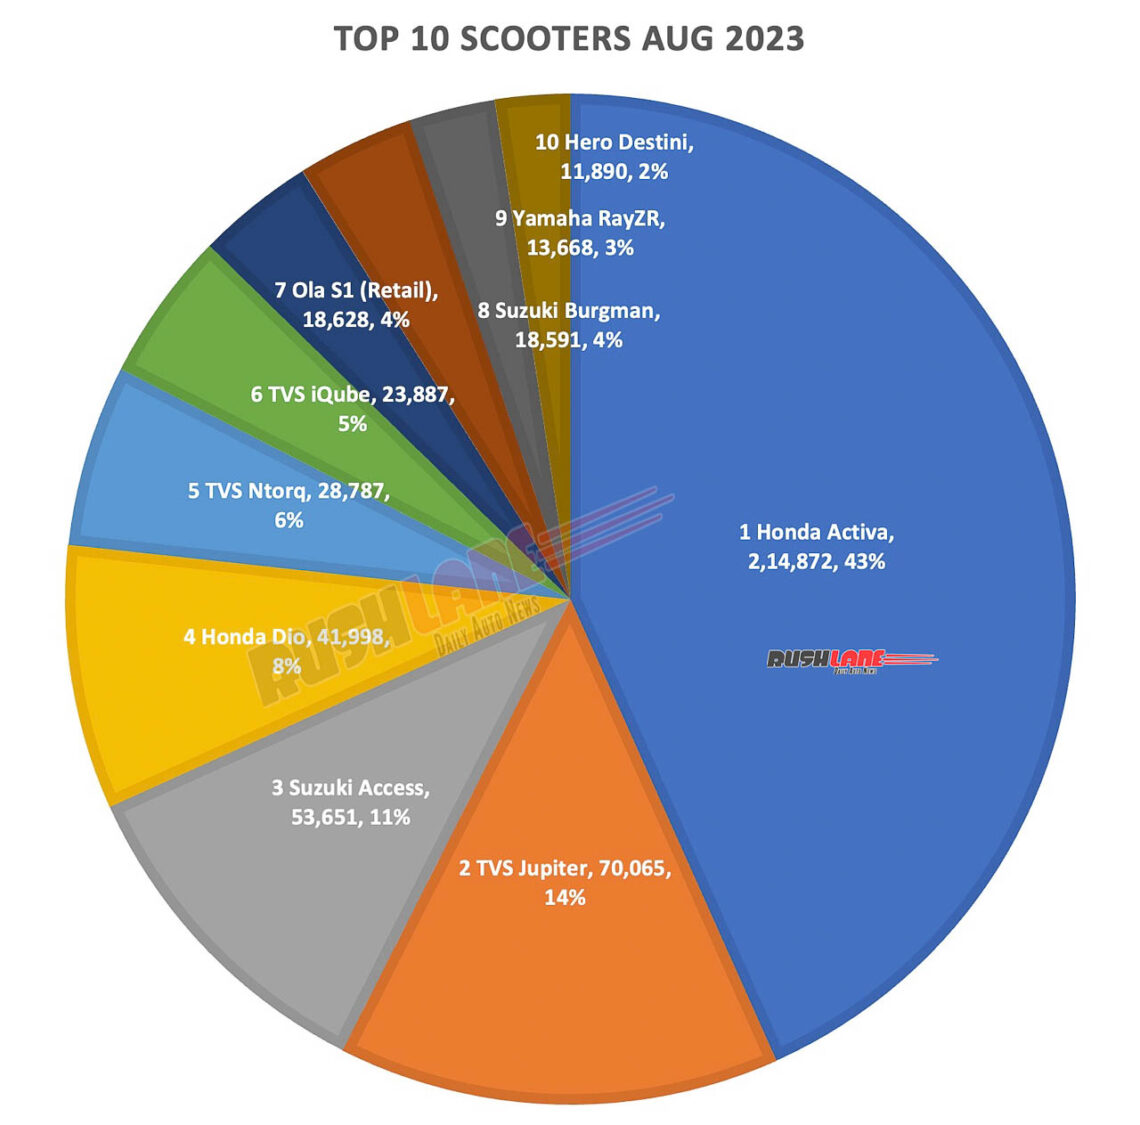 Top 10 Scooters August 2023